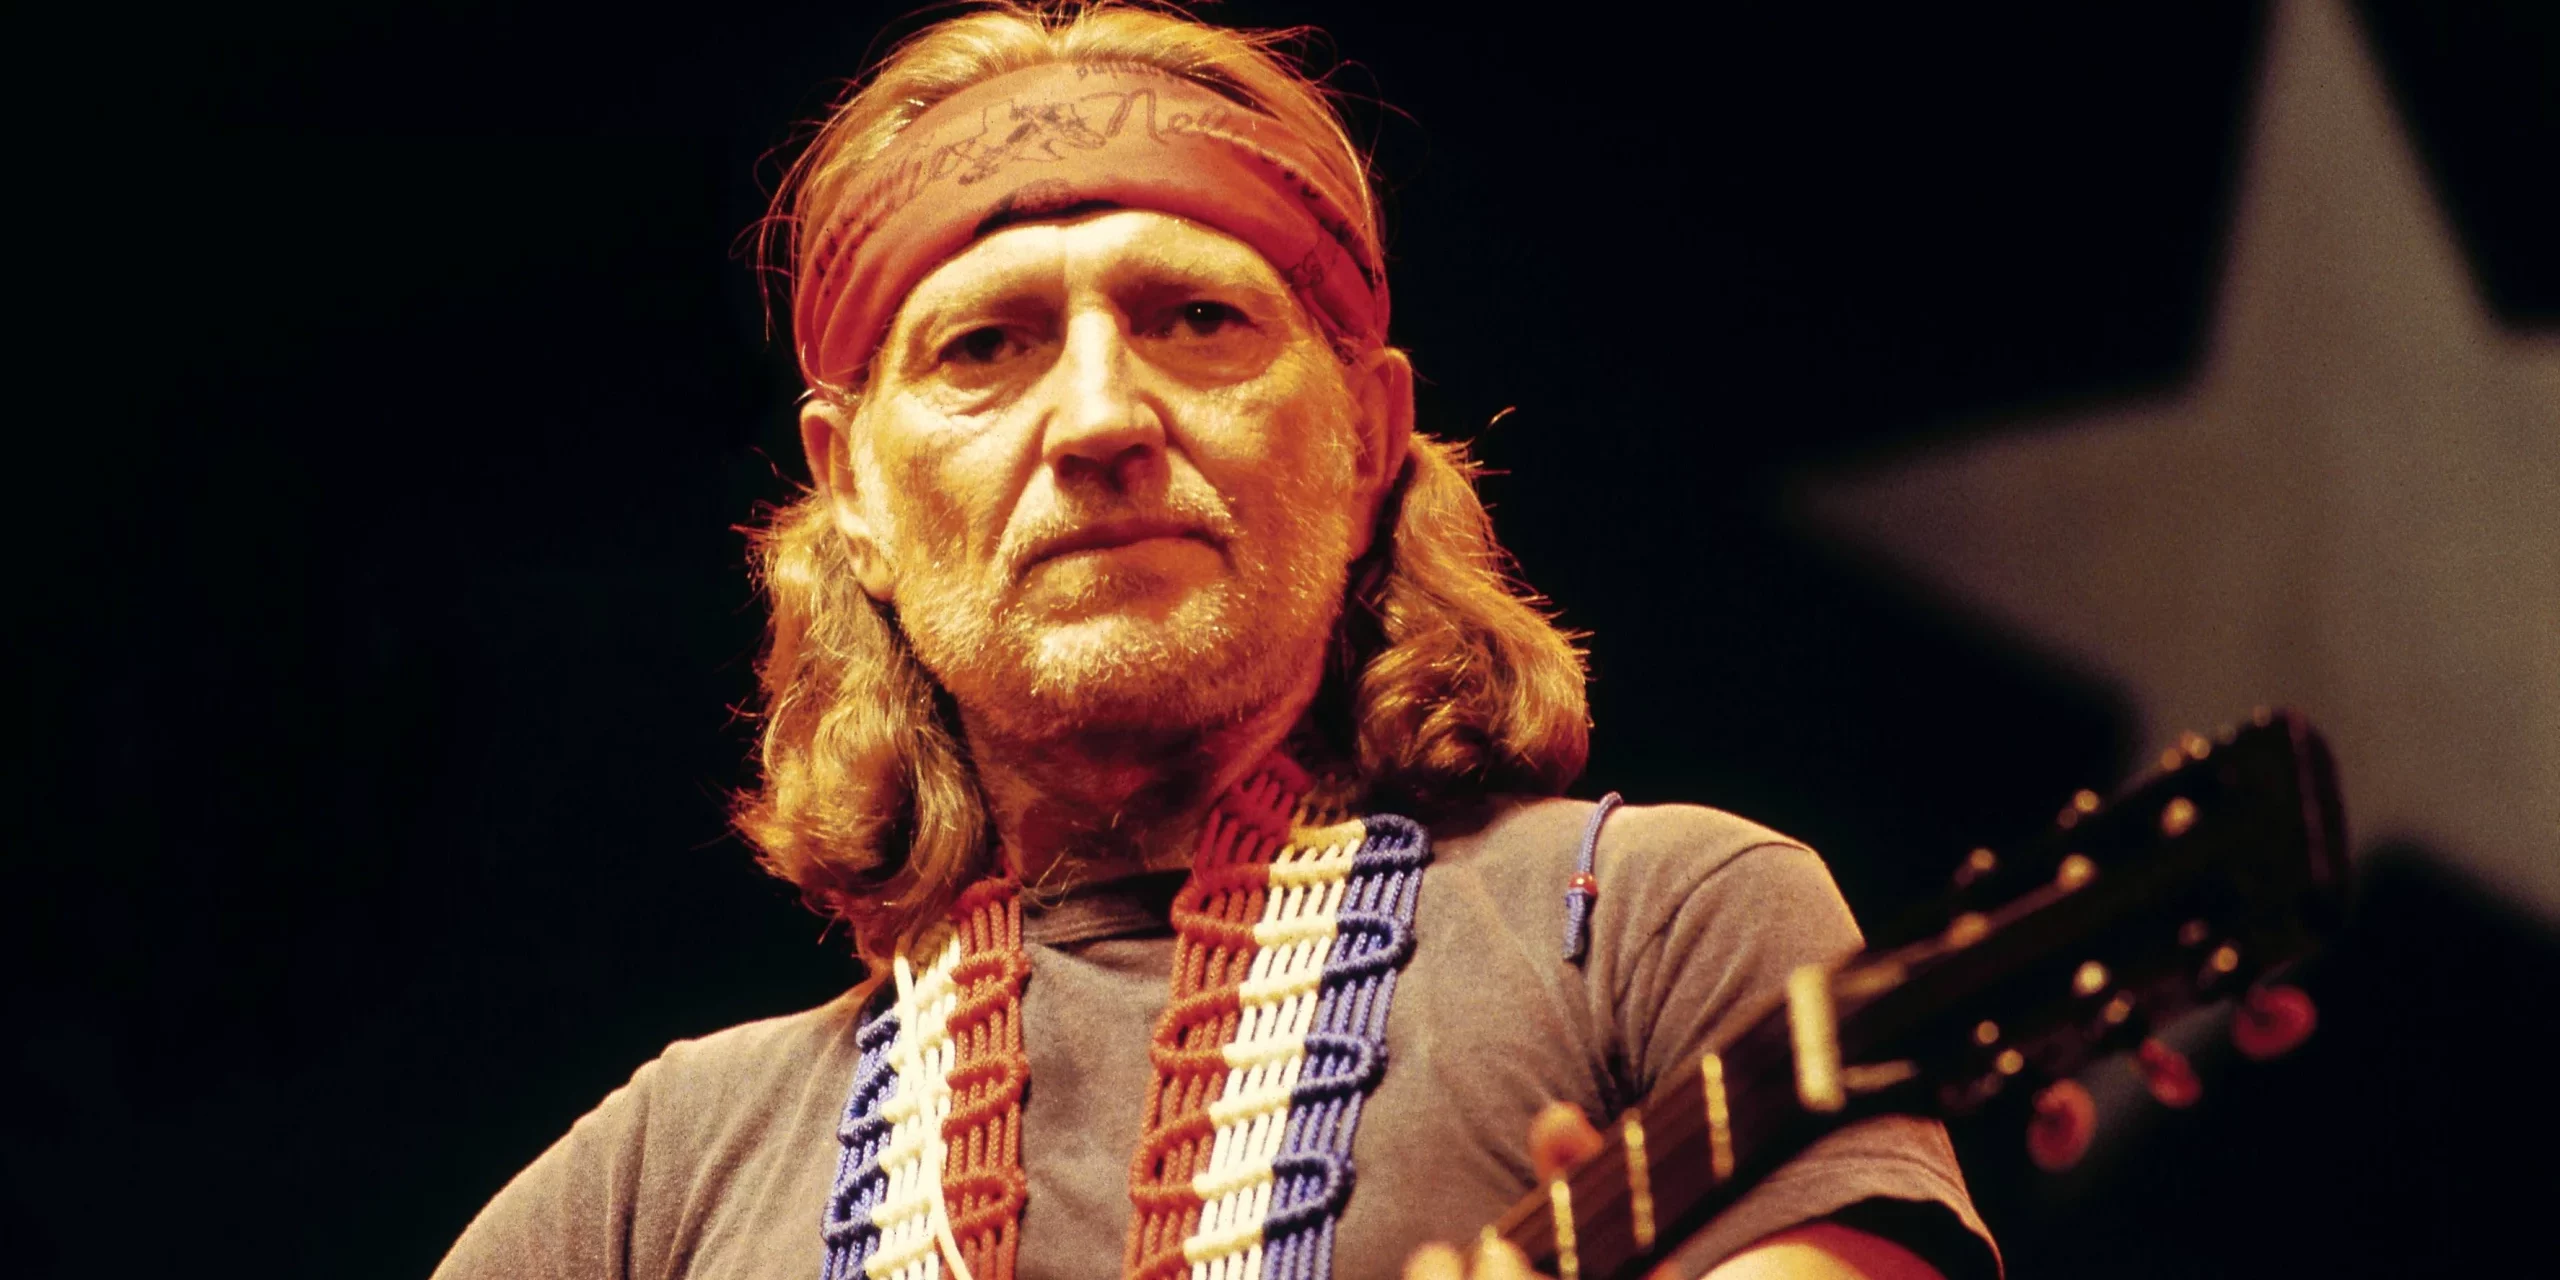 where is Willie Nelson now